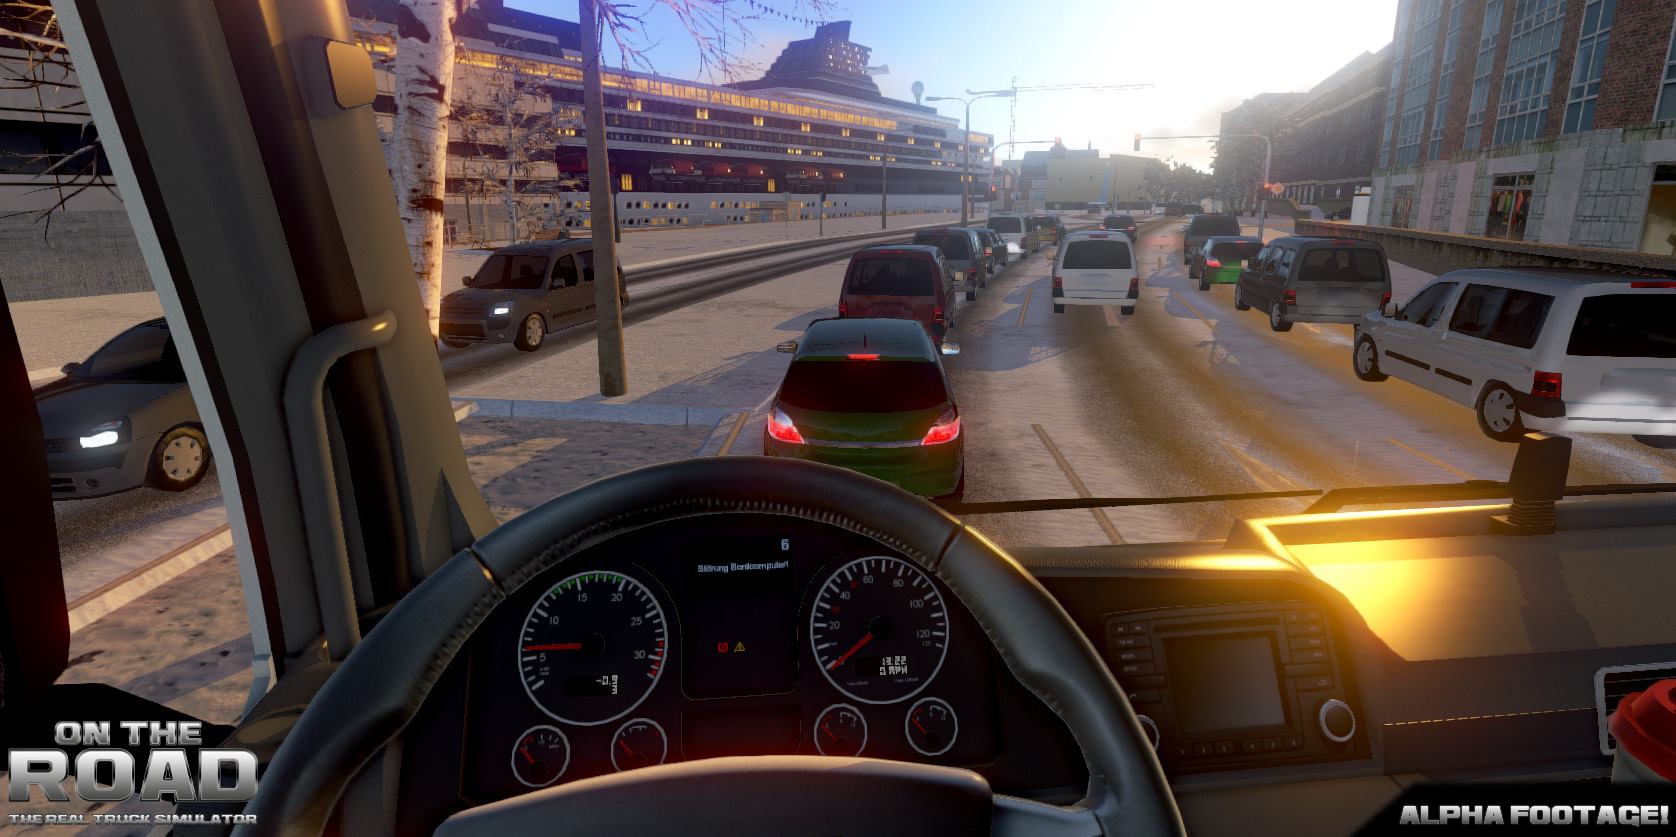 on-the-road-the-real-truck-simulator-alpha-footage-interior-6